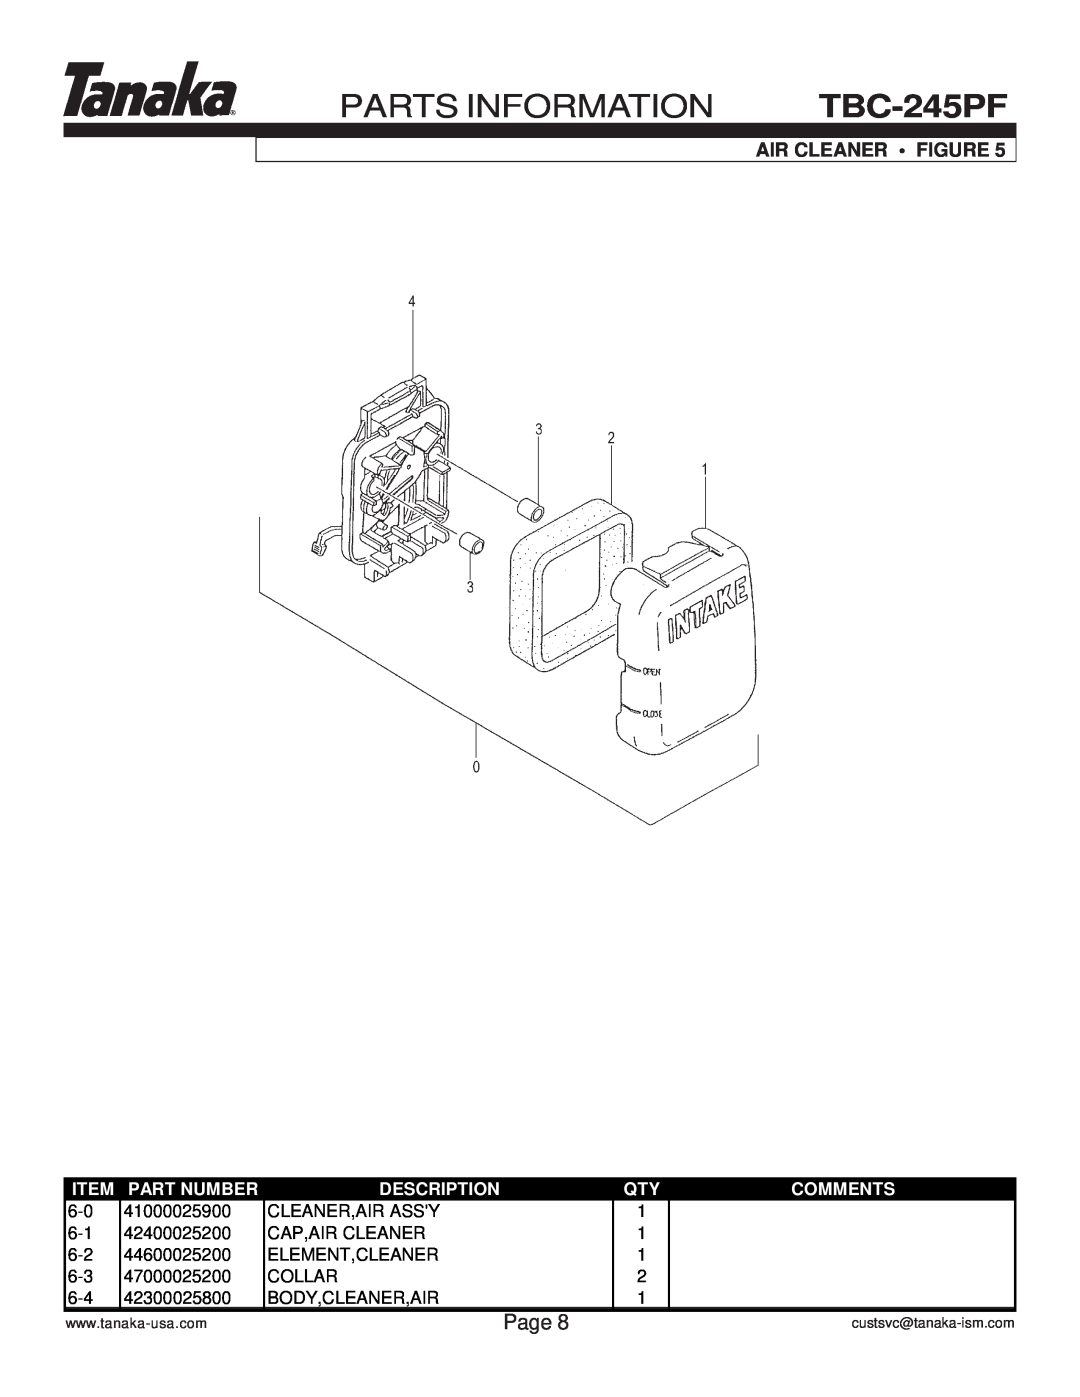 Tanaka TBC-245PF manual Air Cleaner Figure, Parts Information, Page, Part Number, Description, Comments 